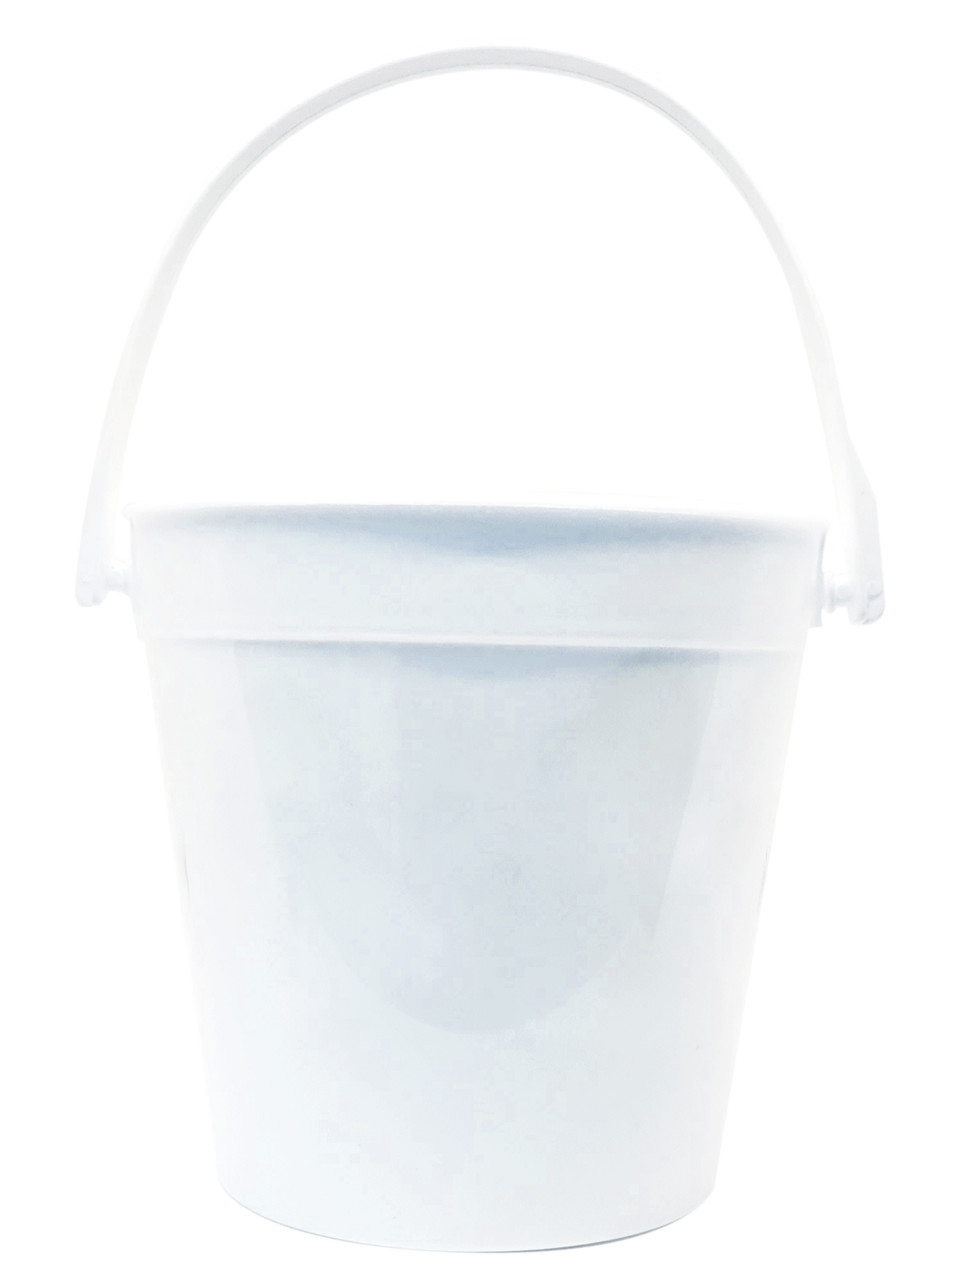 Bpa Free Reusable Plastic Rum Bucket Clear Drinking Bucket 32 Oz Plastic  Punch Pail With Handlespopular, 32 Oz Plastic Punch Pail, Plastic Clear  Bucket With Handles, Ice Buckets Beverage Tubs - Buy